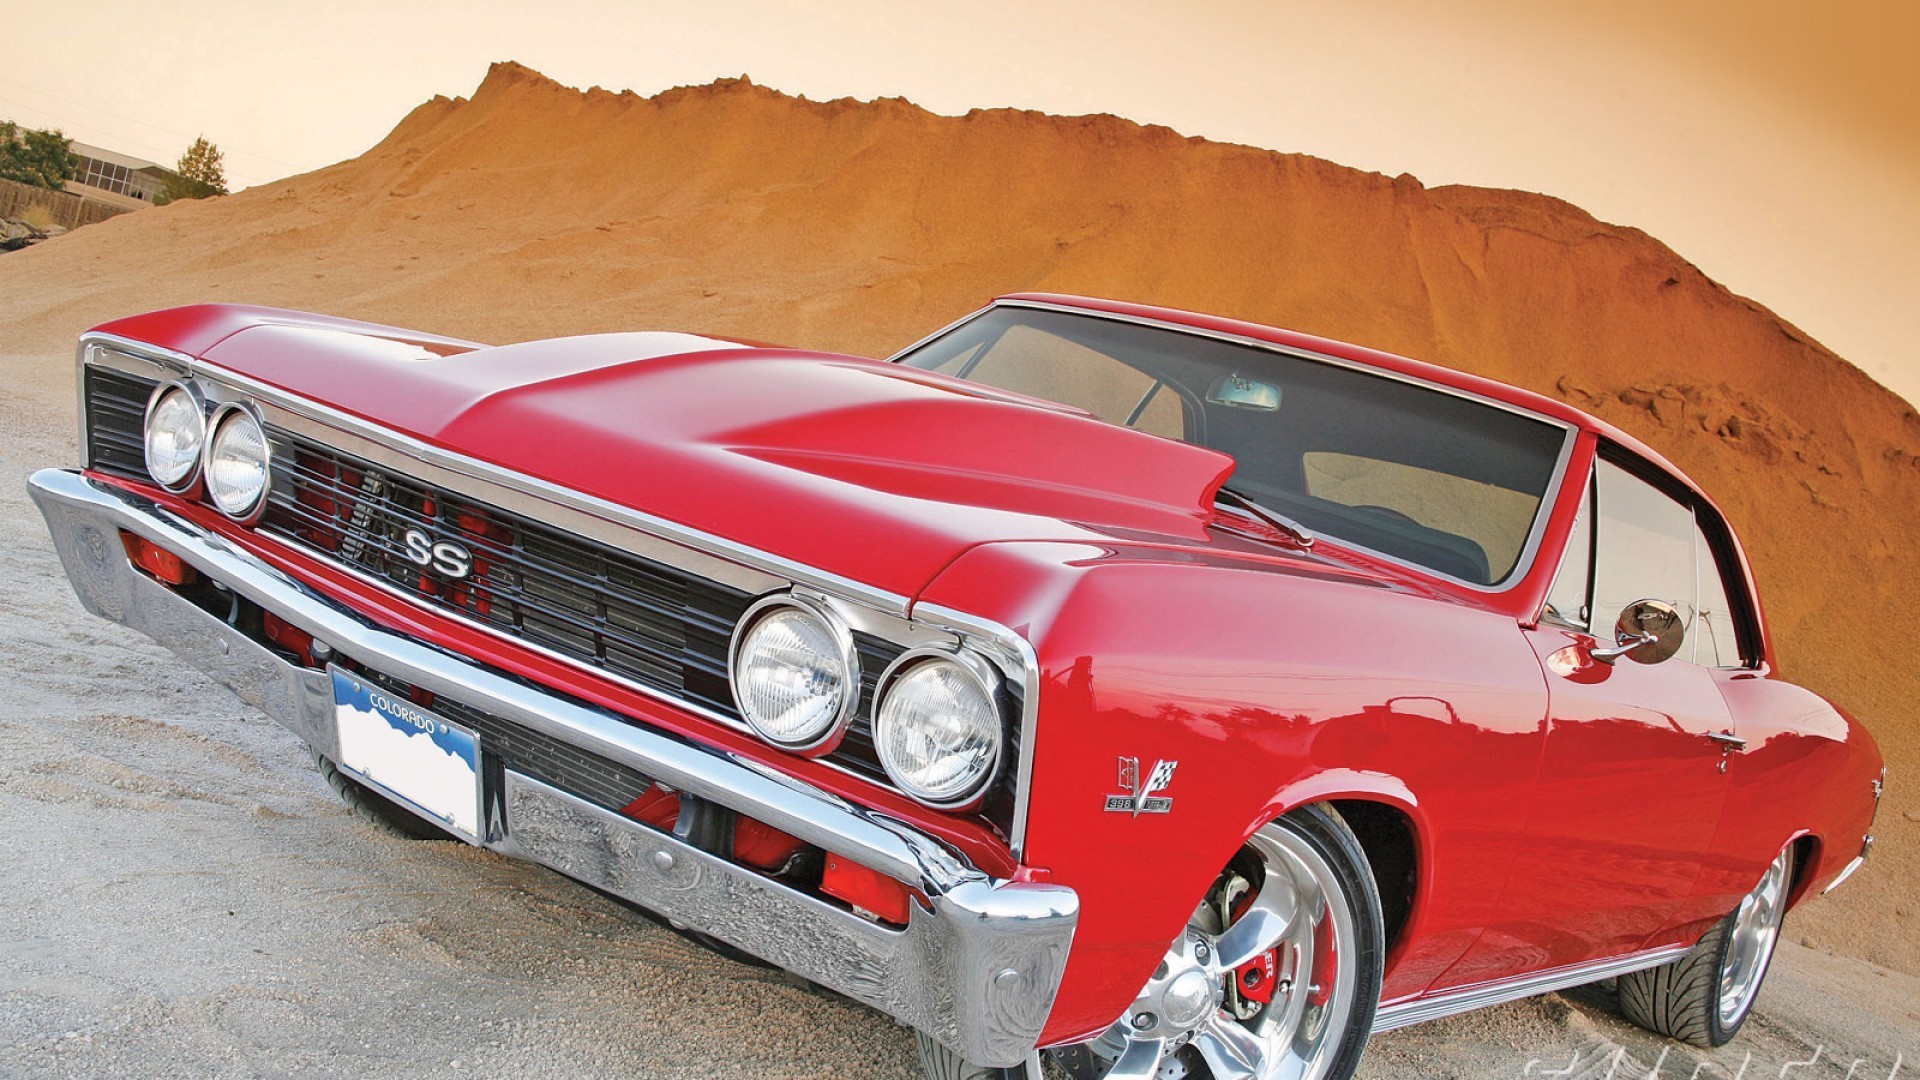 General 1920x1080 car Chevrolet Chevelle Chevrolet red cars vehicle muscle cars American cars